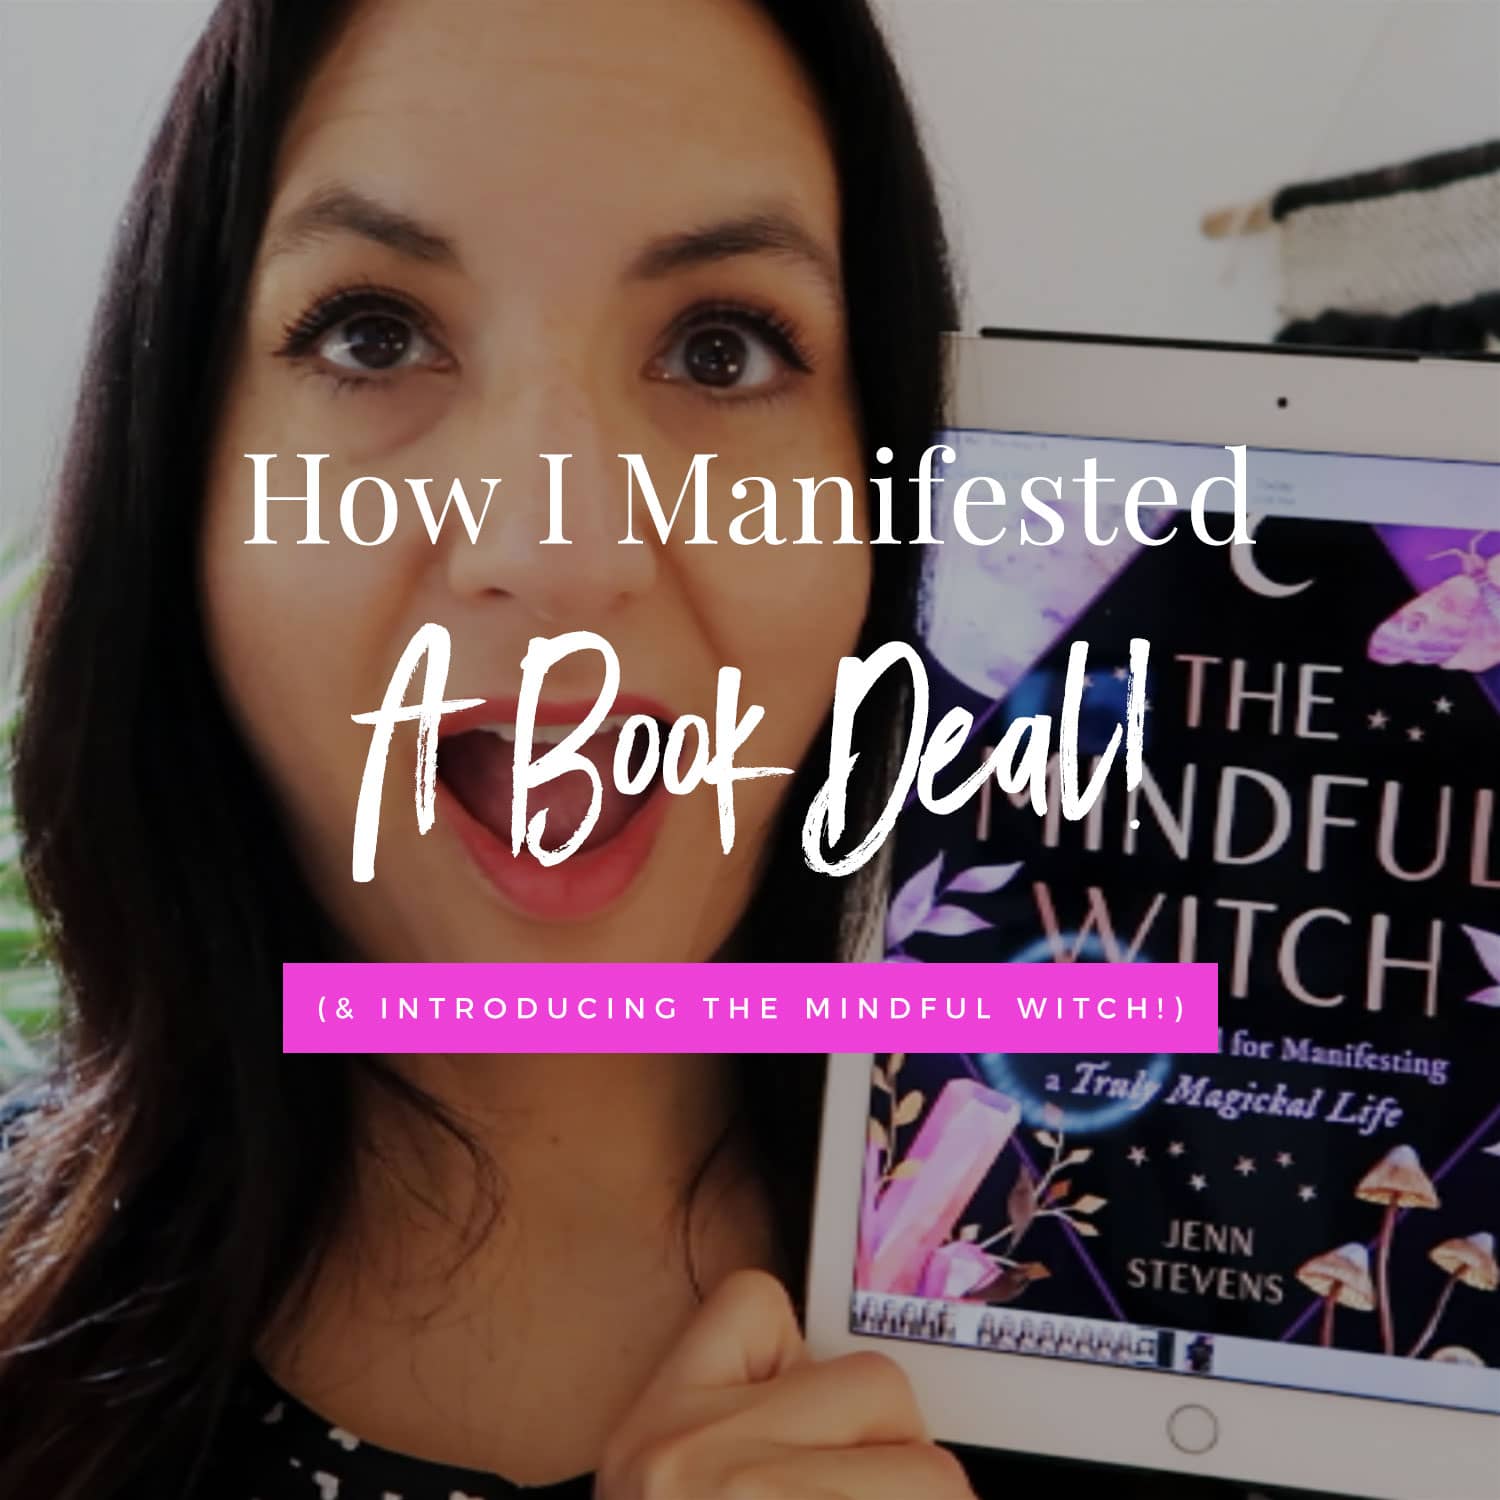 Video: How I Manifested A Book Deal